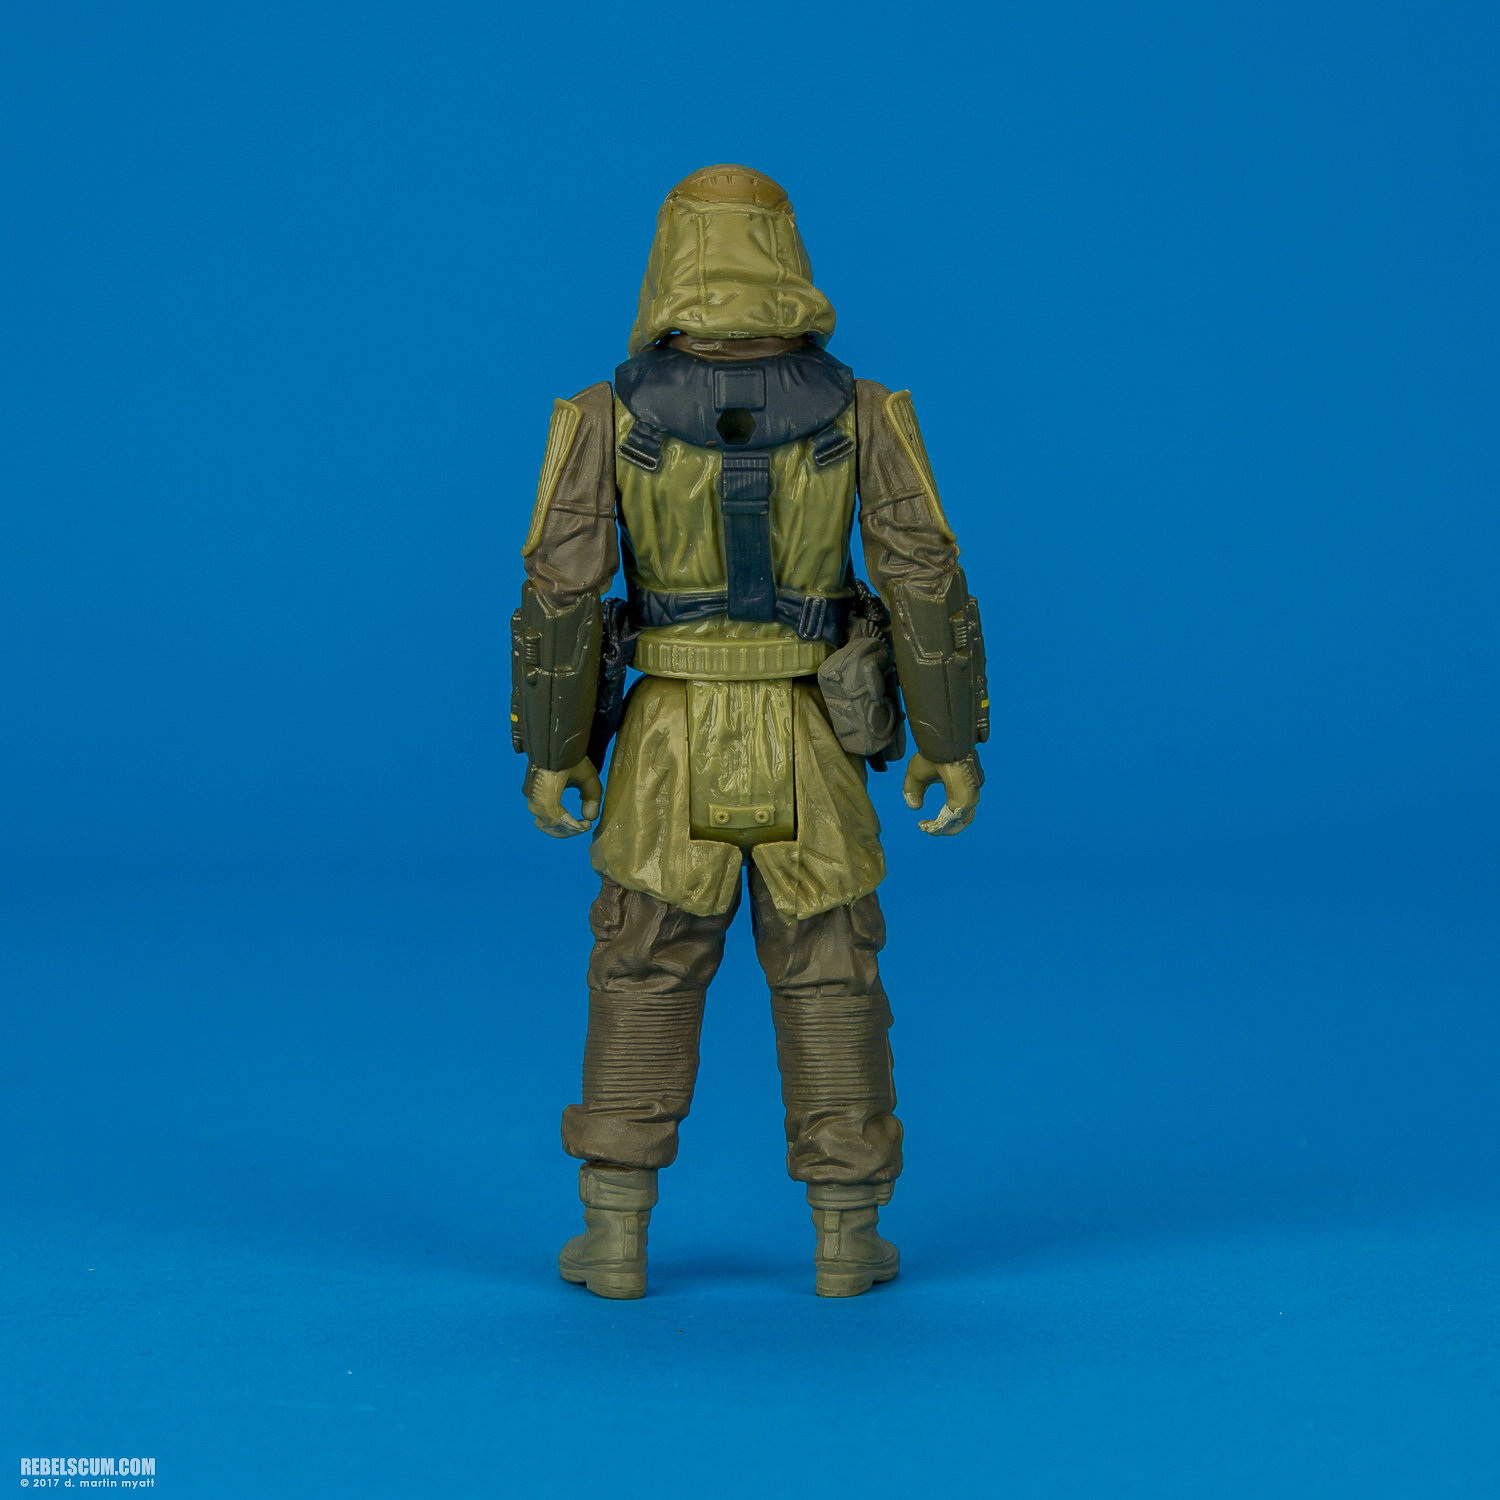 Kohls-Exclusive-Four-Pack-Rogue-One-B9605-023.jpg